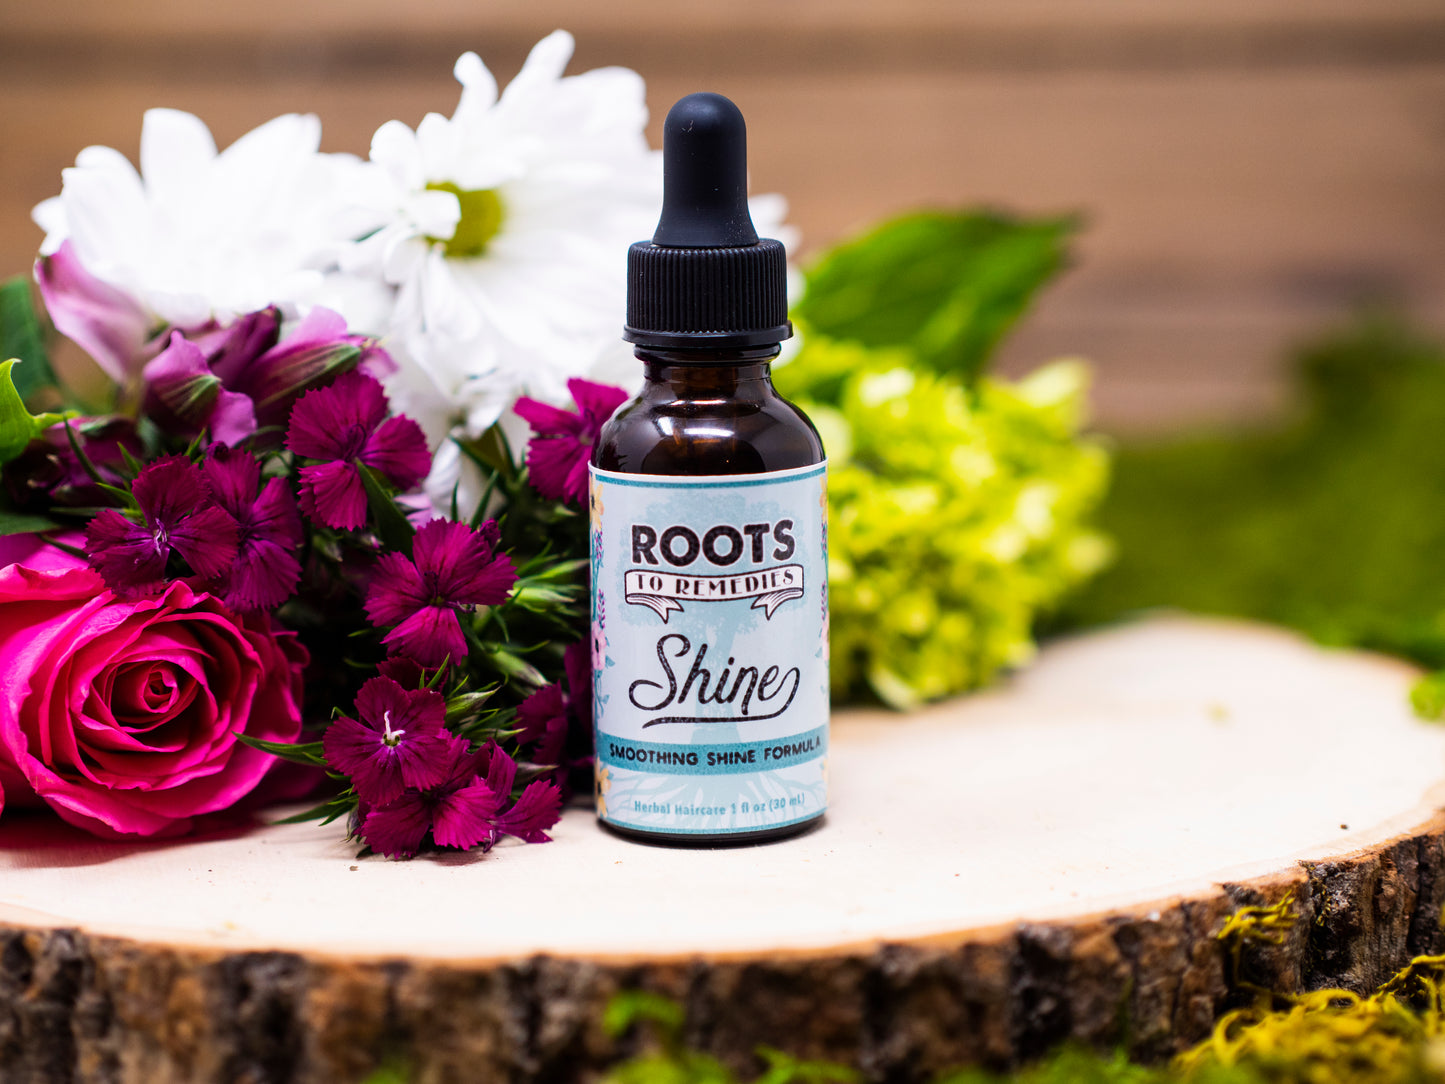 “SHINE” SOOTHING SHINE HERBAL INFUSED HAIR OIL